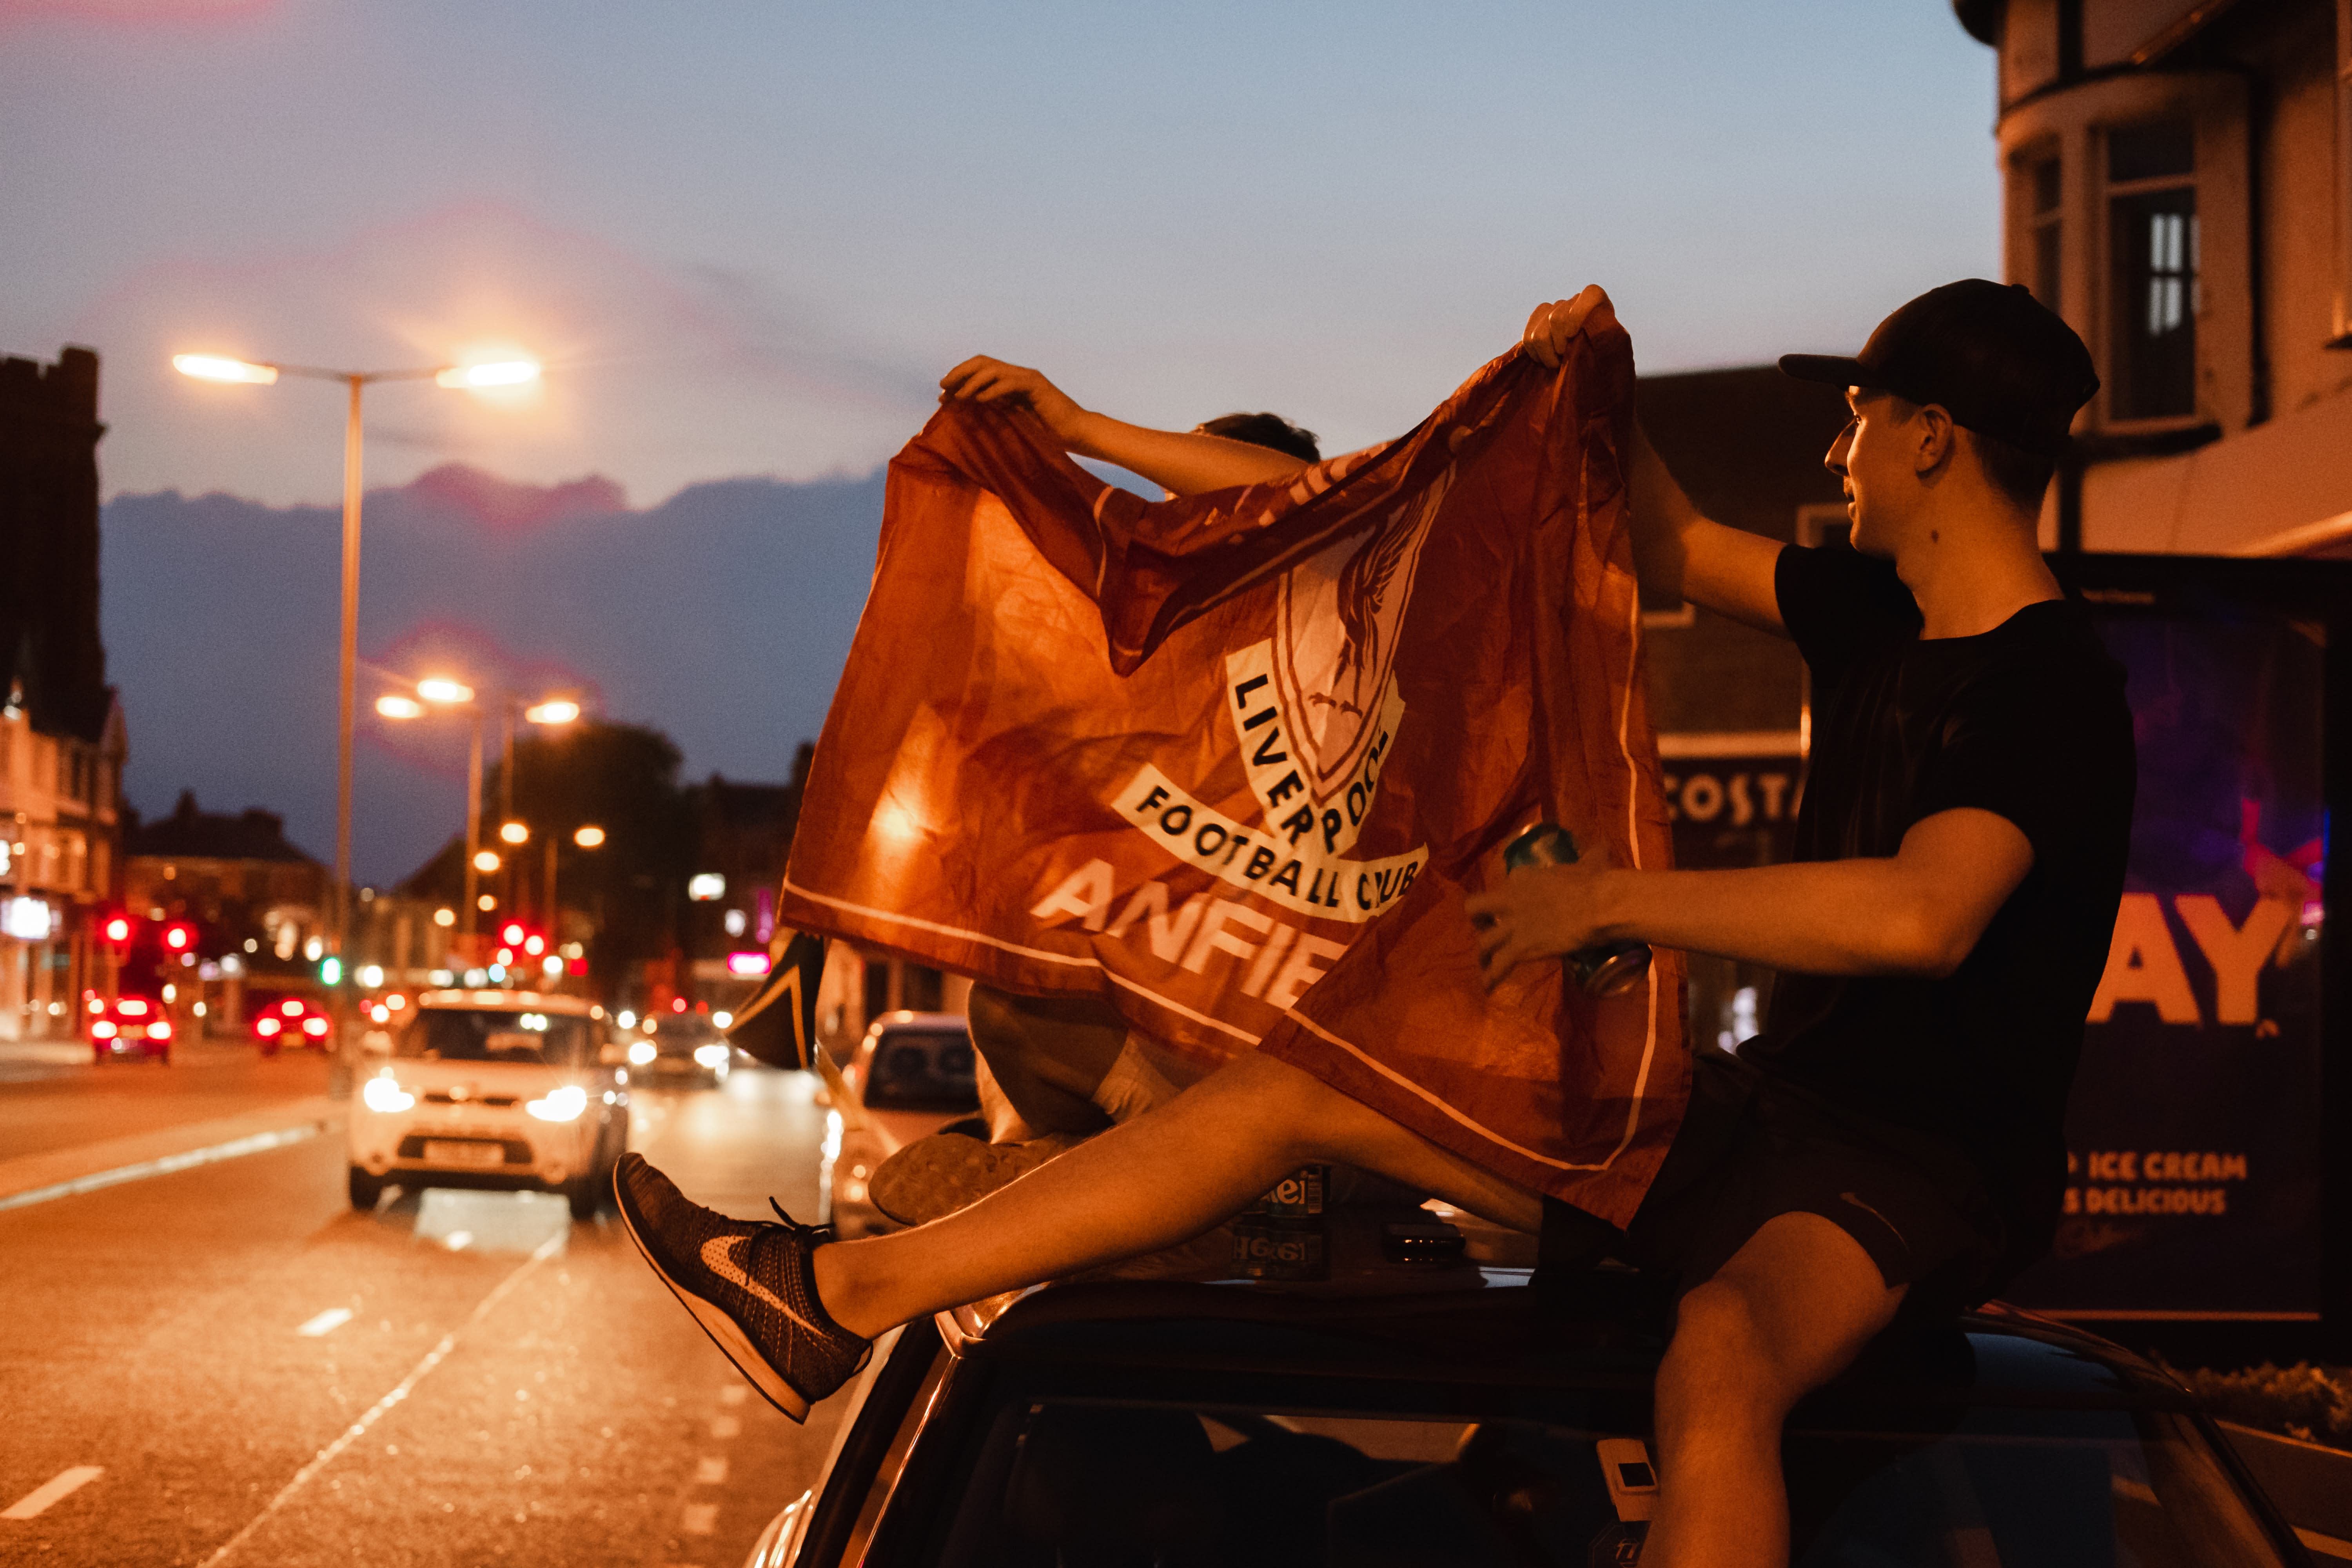 Fans holding a Liverpool flag atop a car 